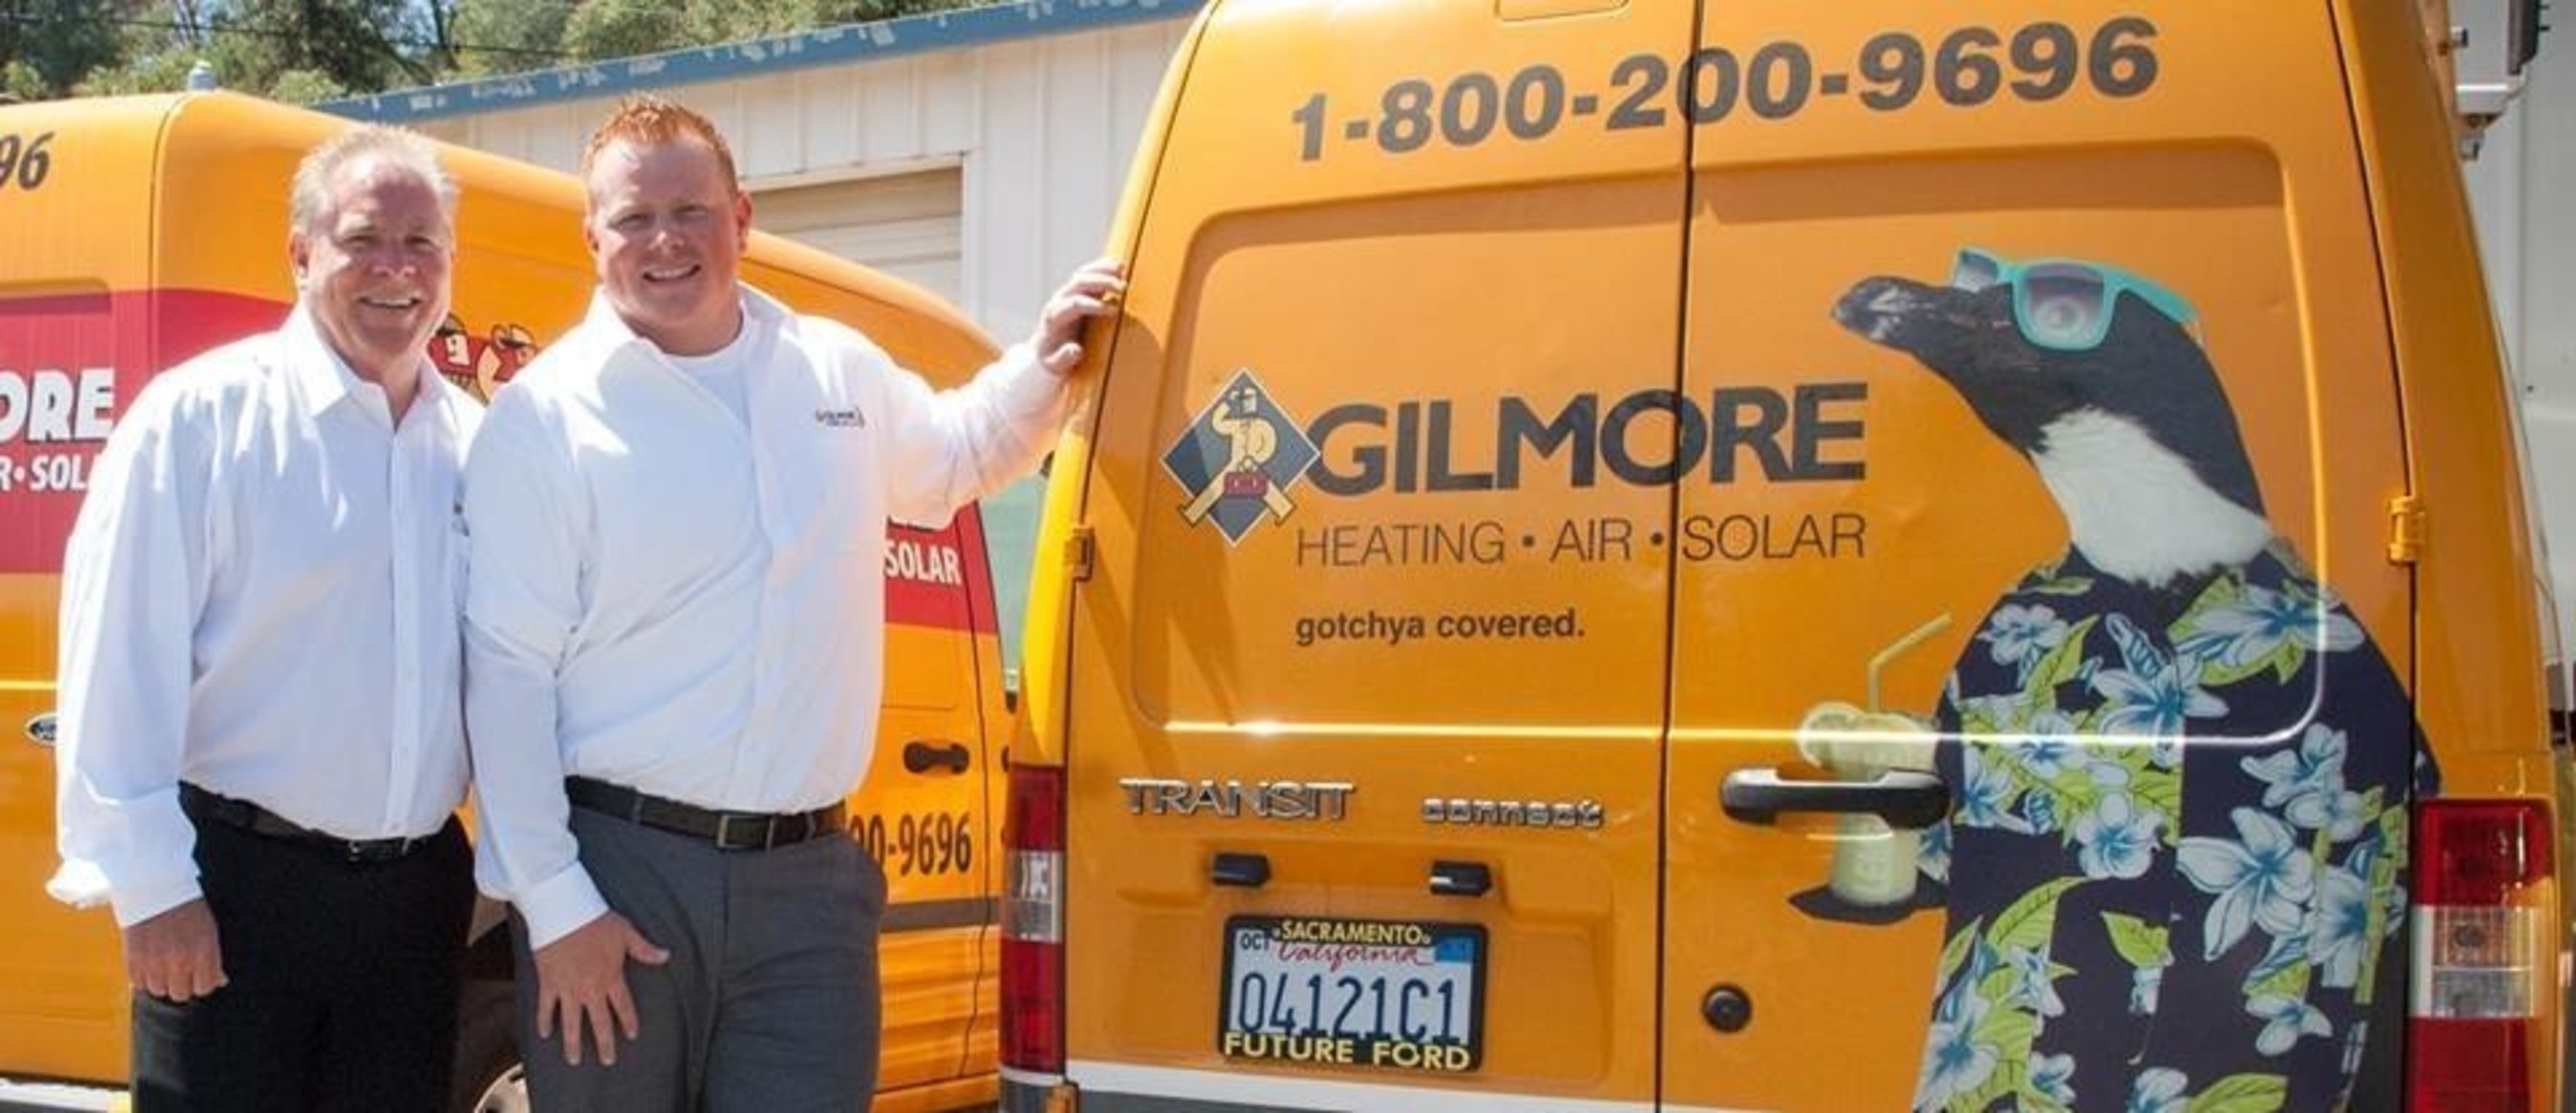 Gilmore Heating, Air, Solar, a family-owned and operated company, serves the Sacramento area. John Gilmore (l), and son, Darrin, GM, are dedicated to "Get More with Gilmore" motto.